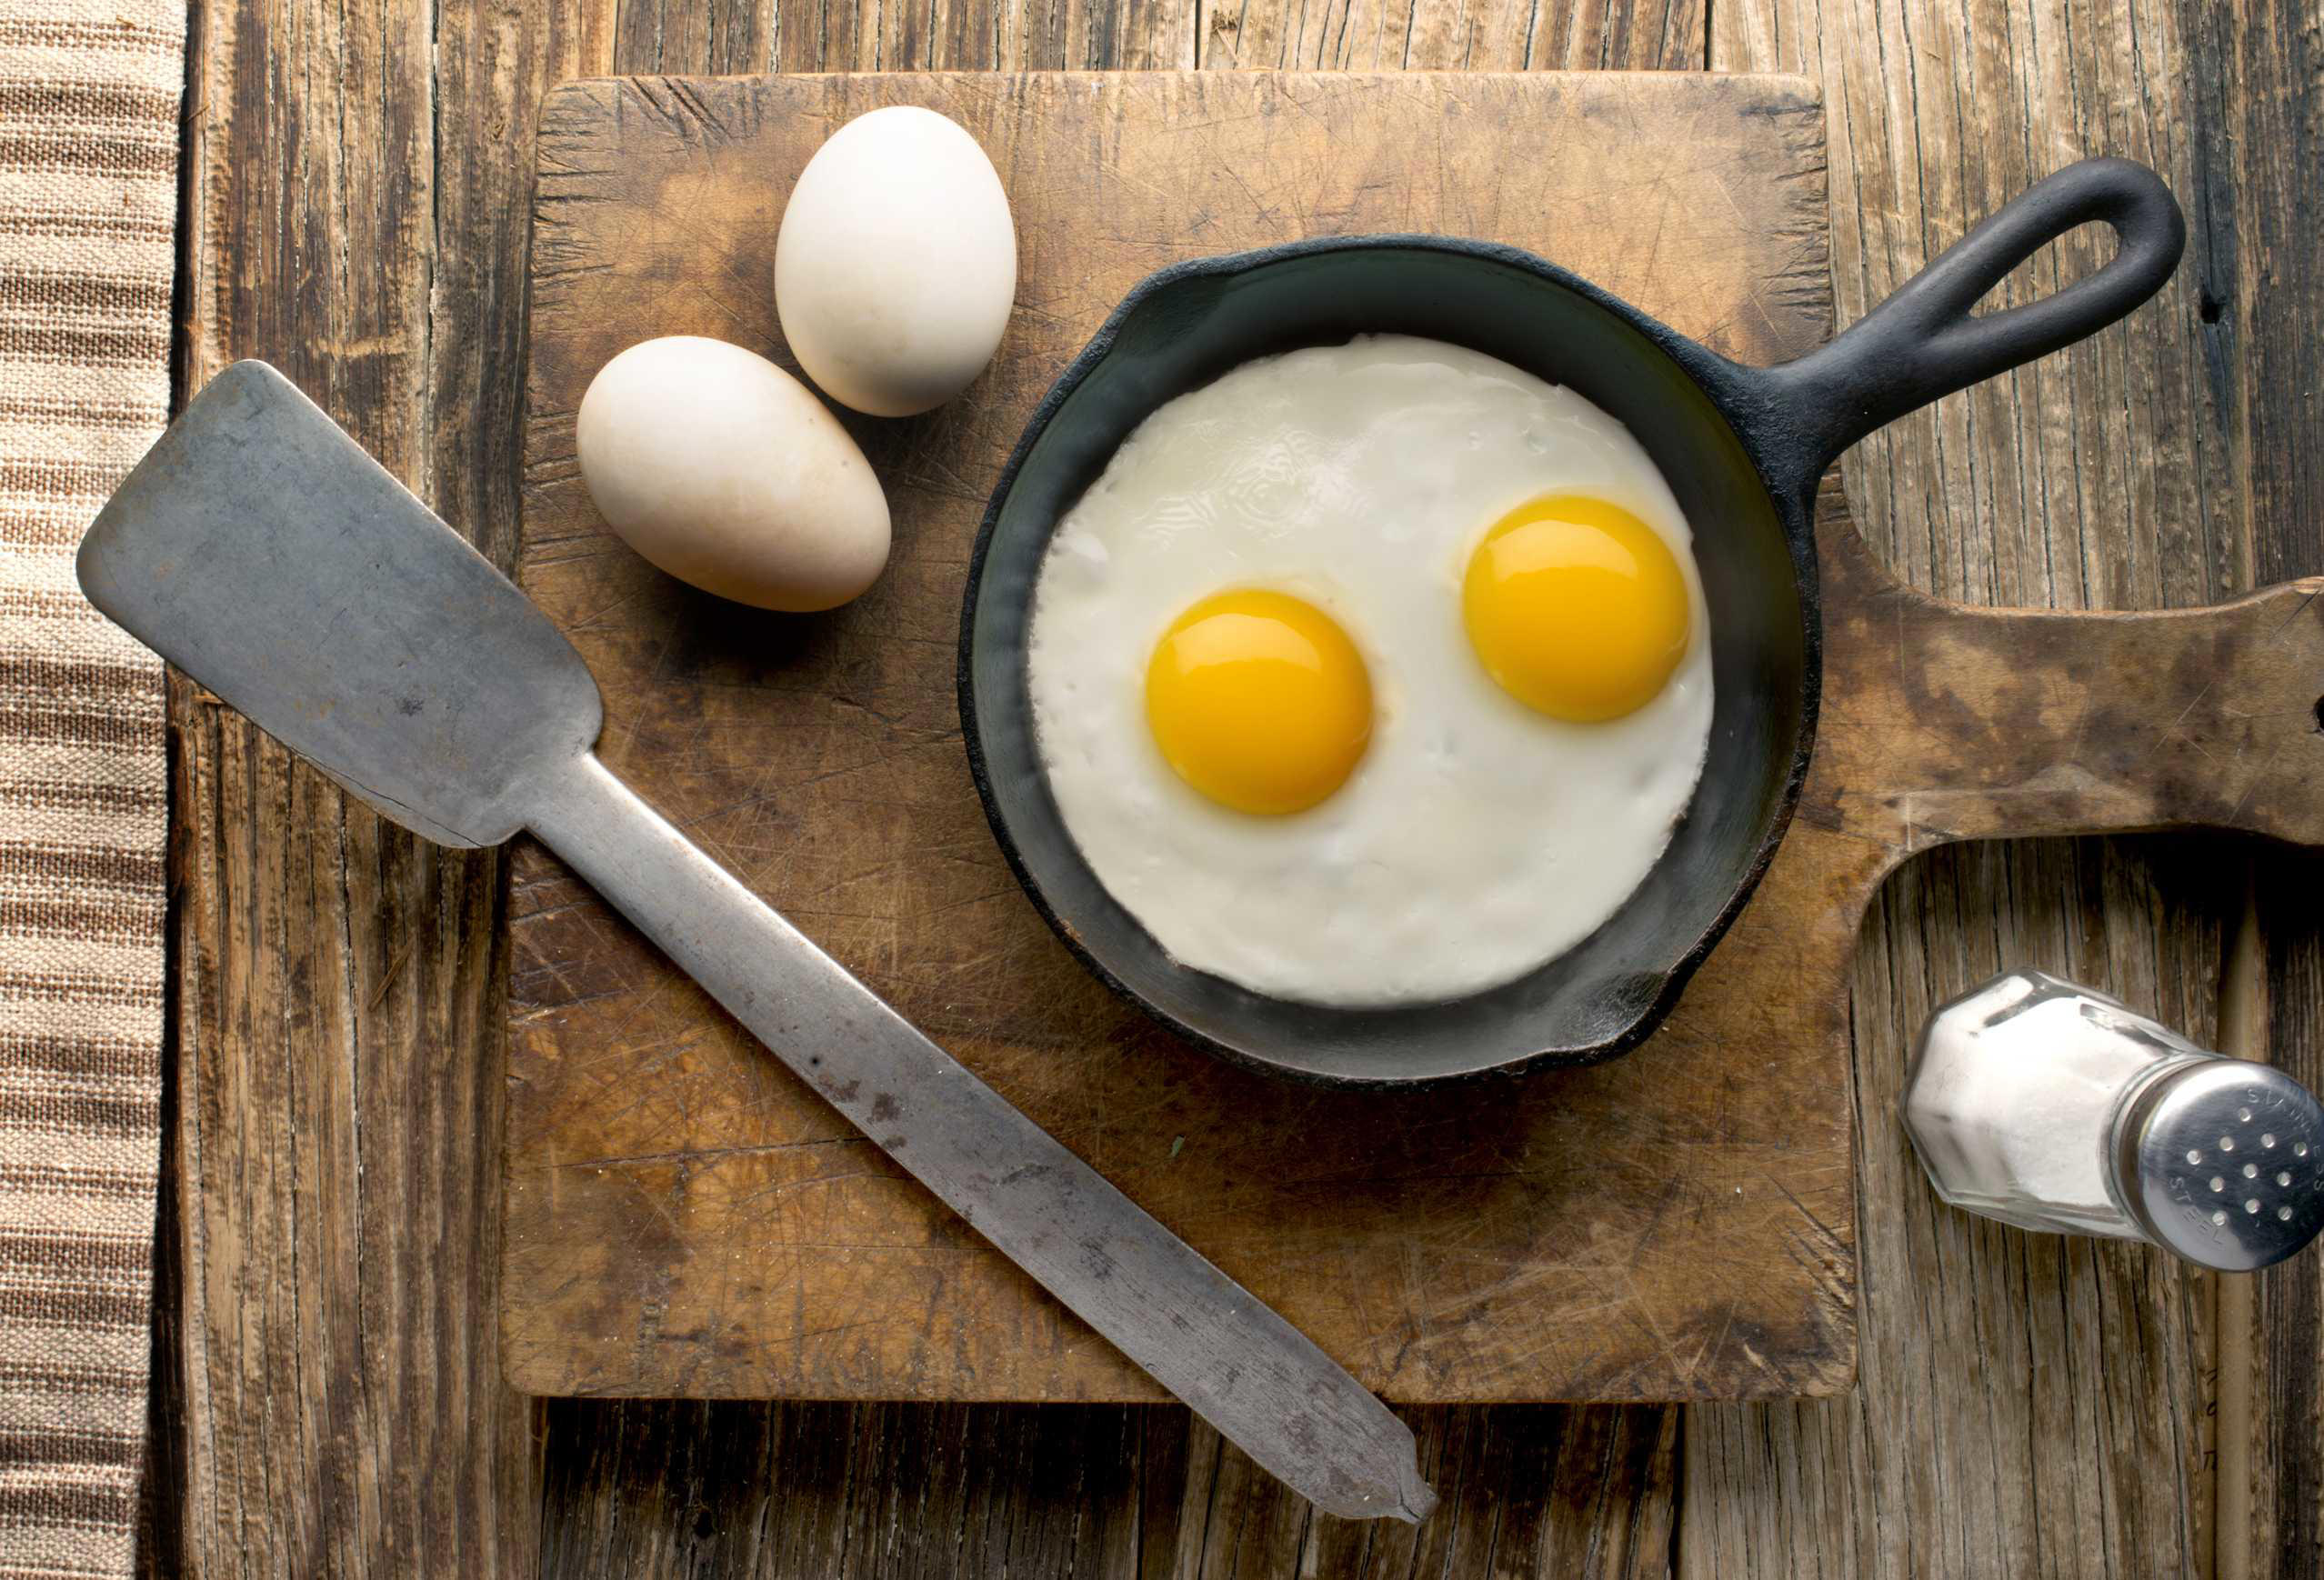 Nutrition Professionals Reveal Healthy Alternatives To Boiled Eggs 